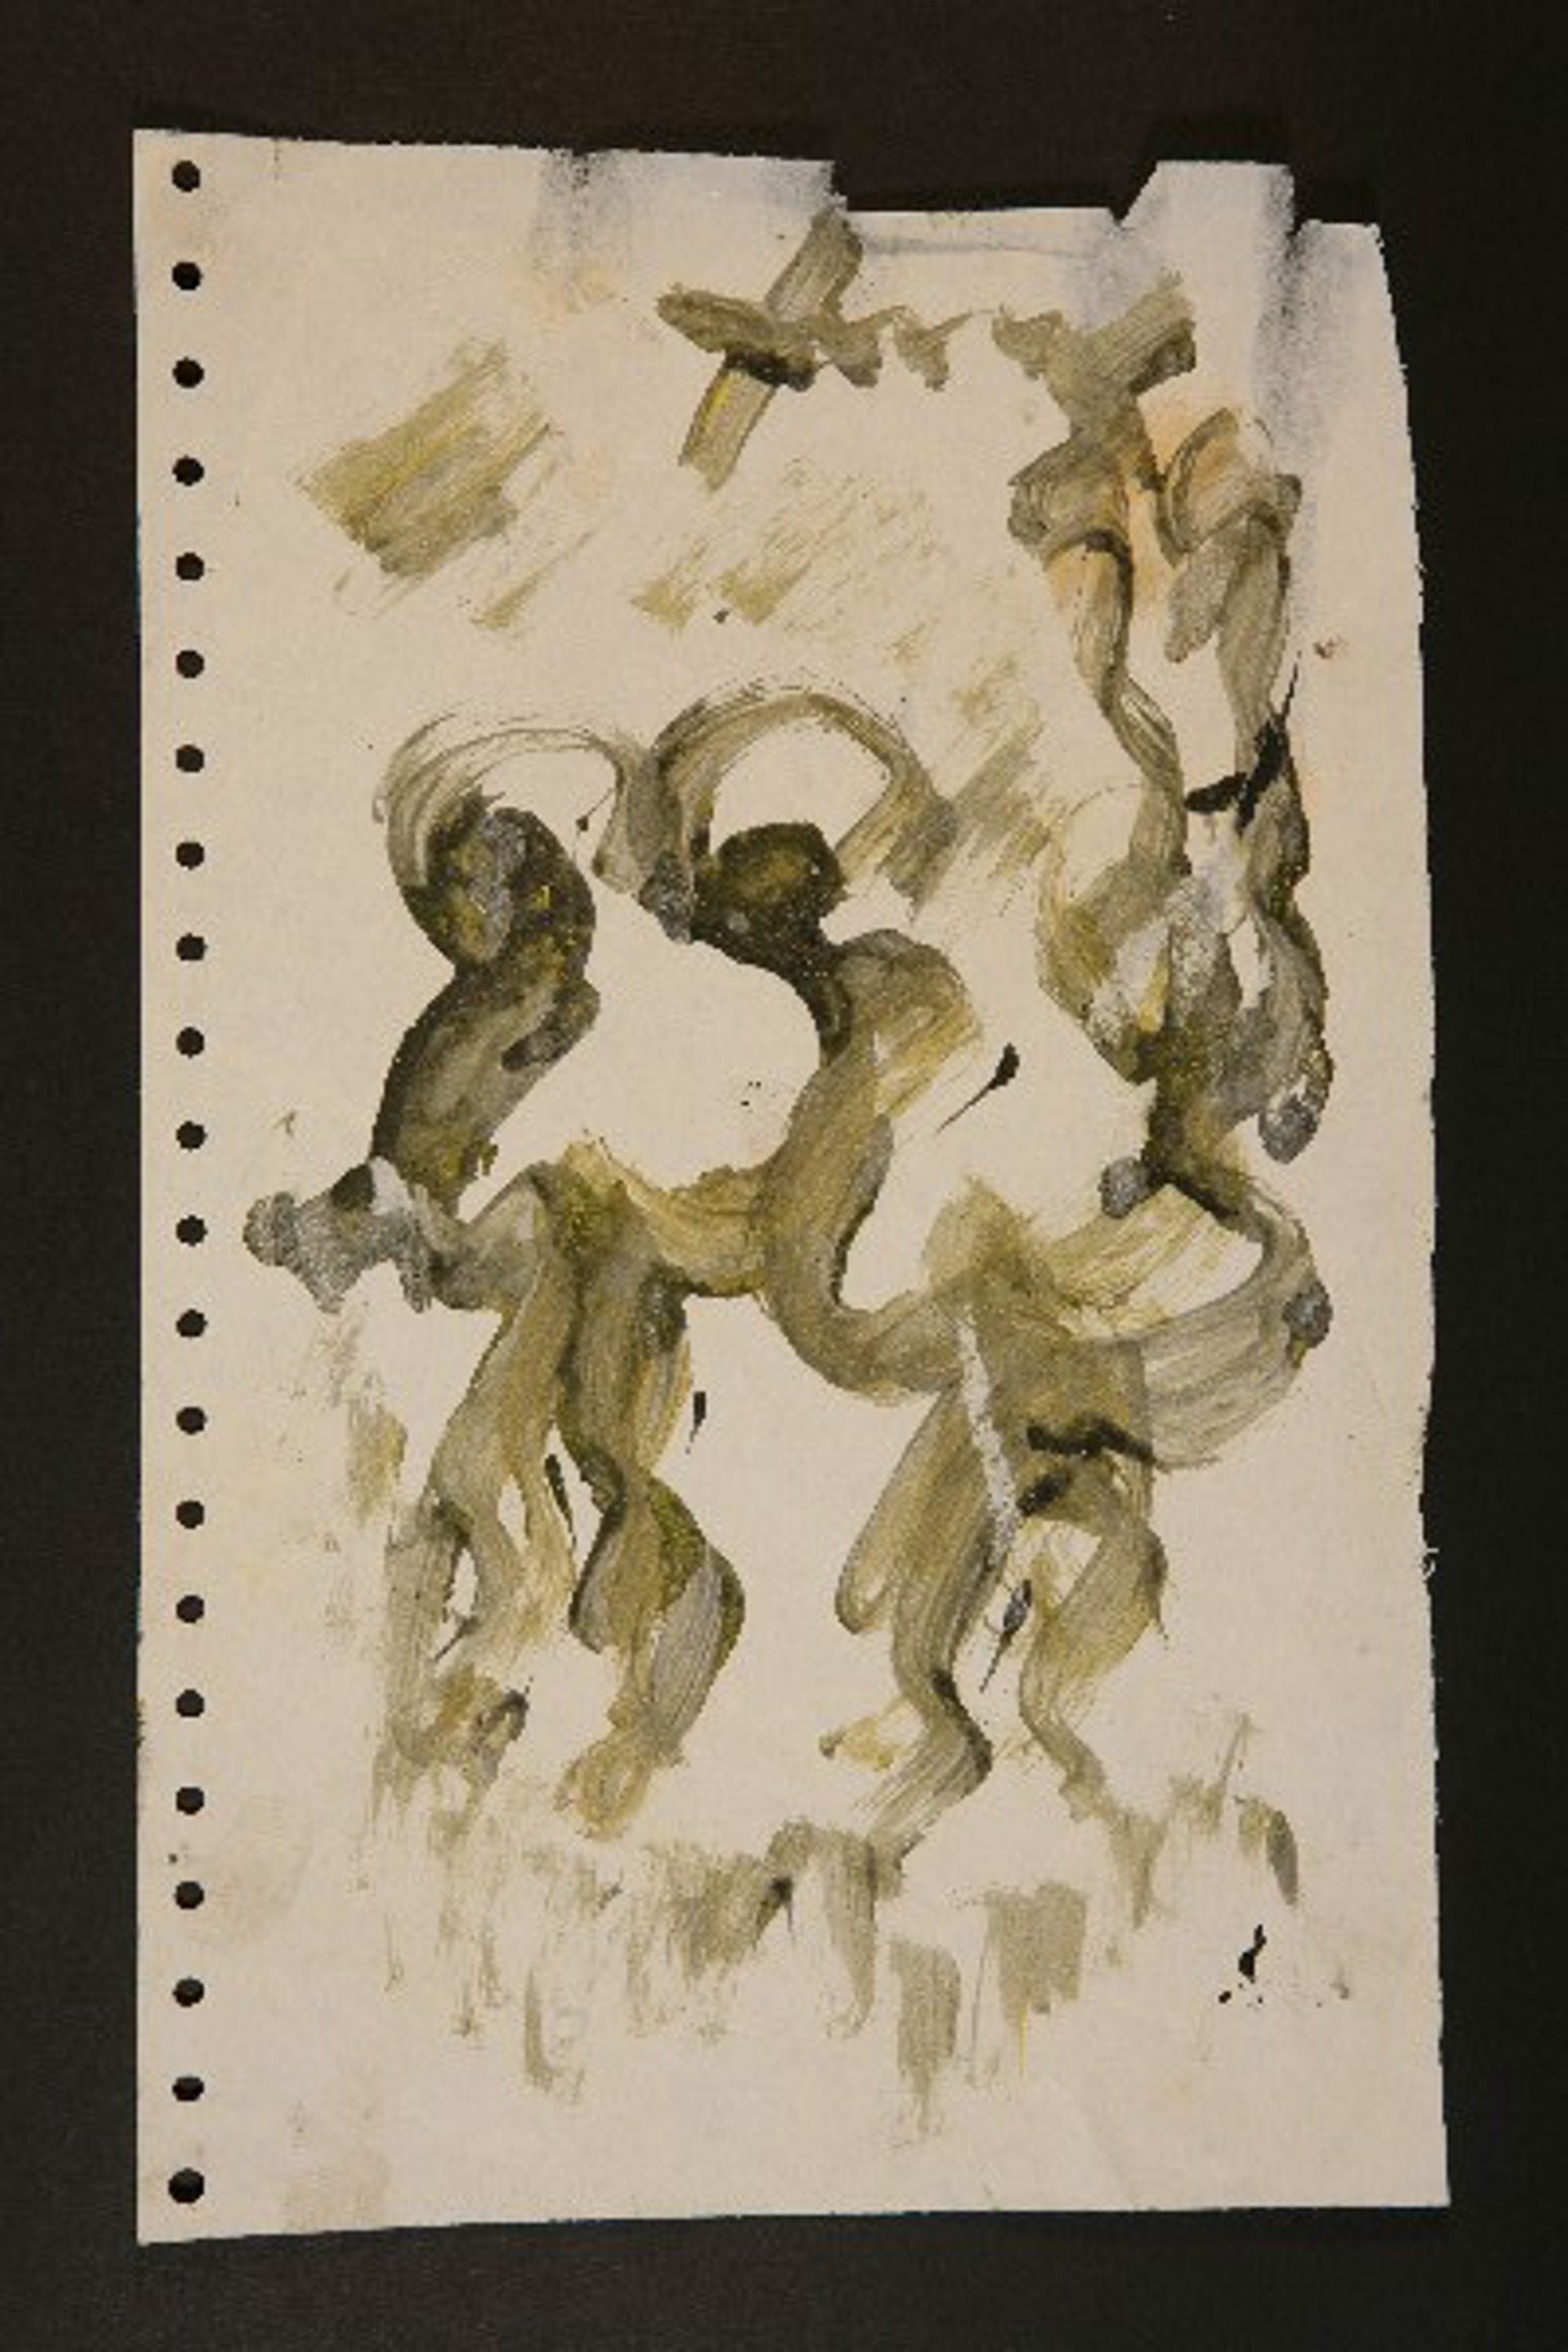 Drawing from the 1990's #89 by Purvis Young (1943 - 2010)